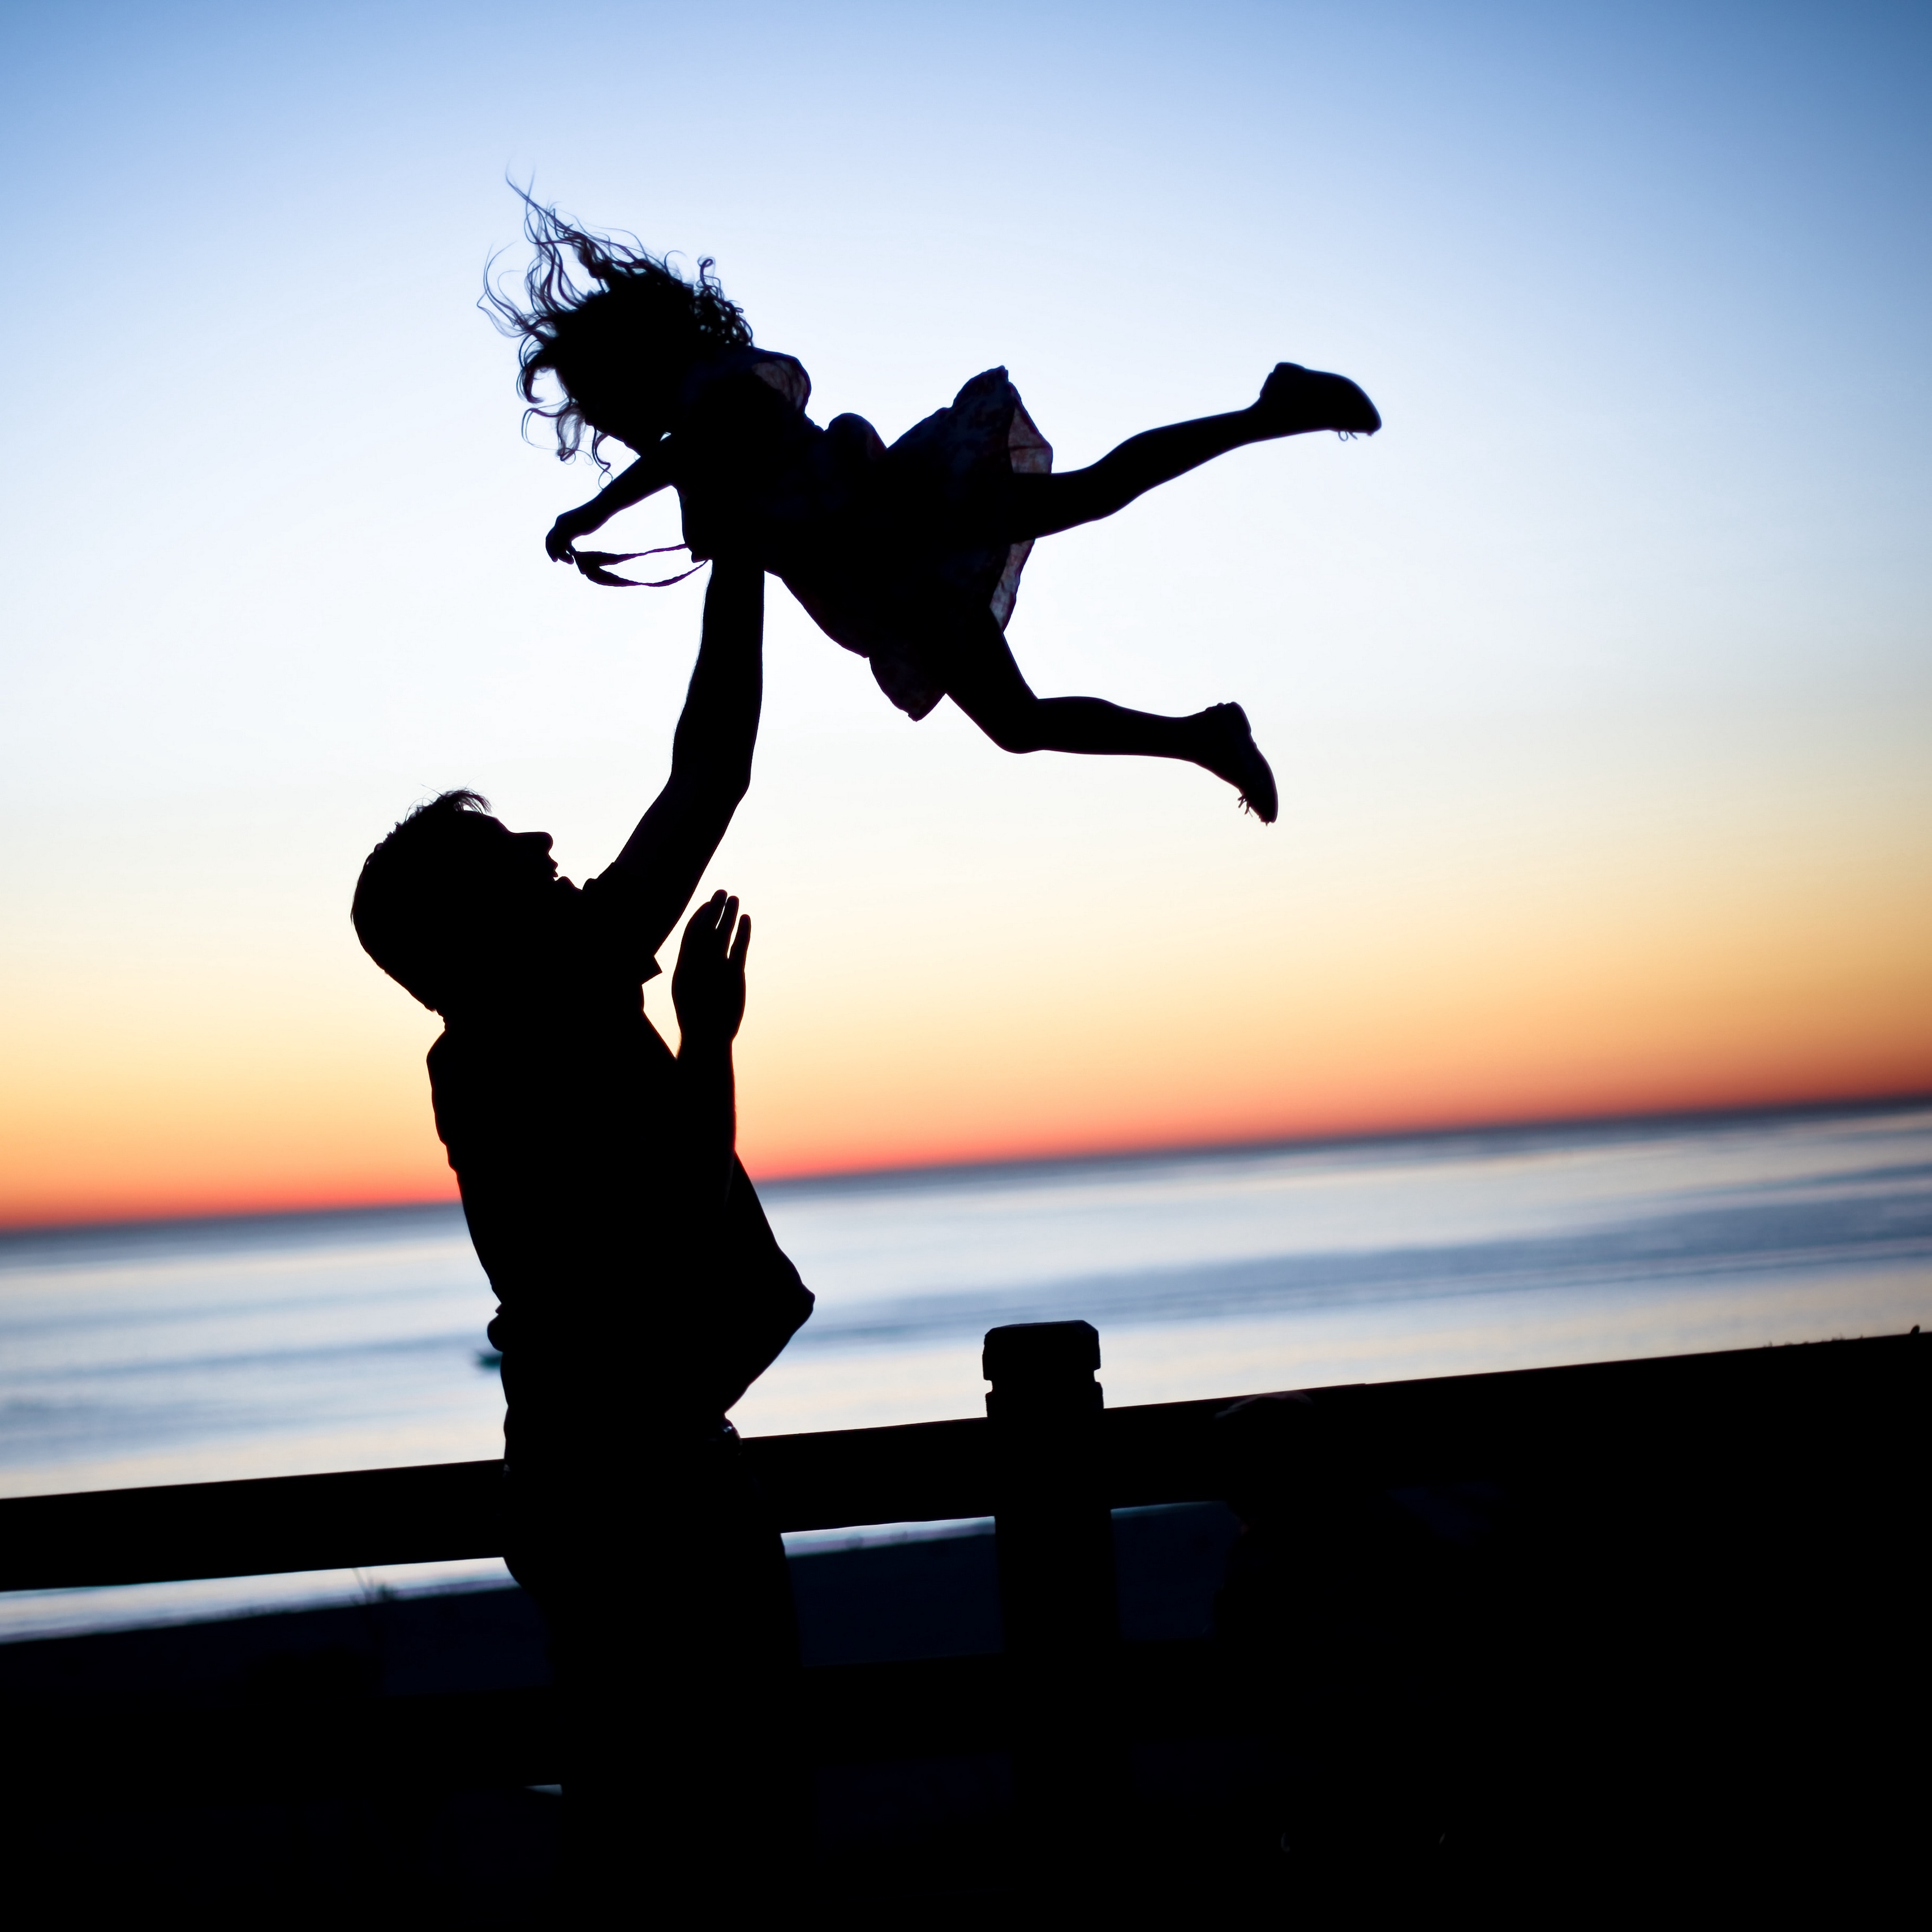 Download wallpaper 3415x3415 father, daughter, silhouettes, family